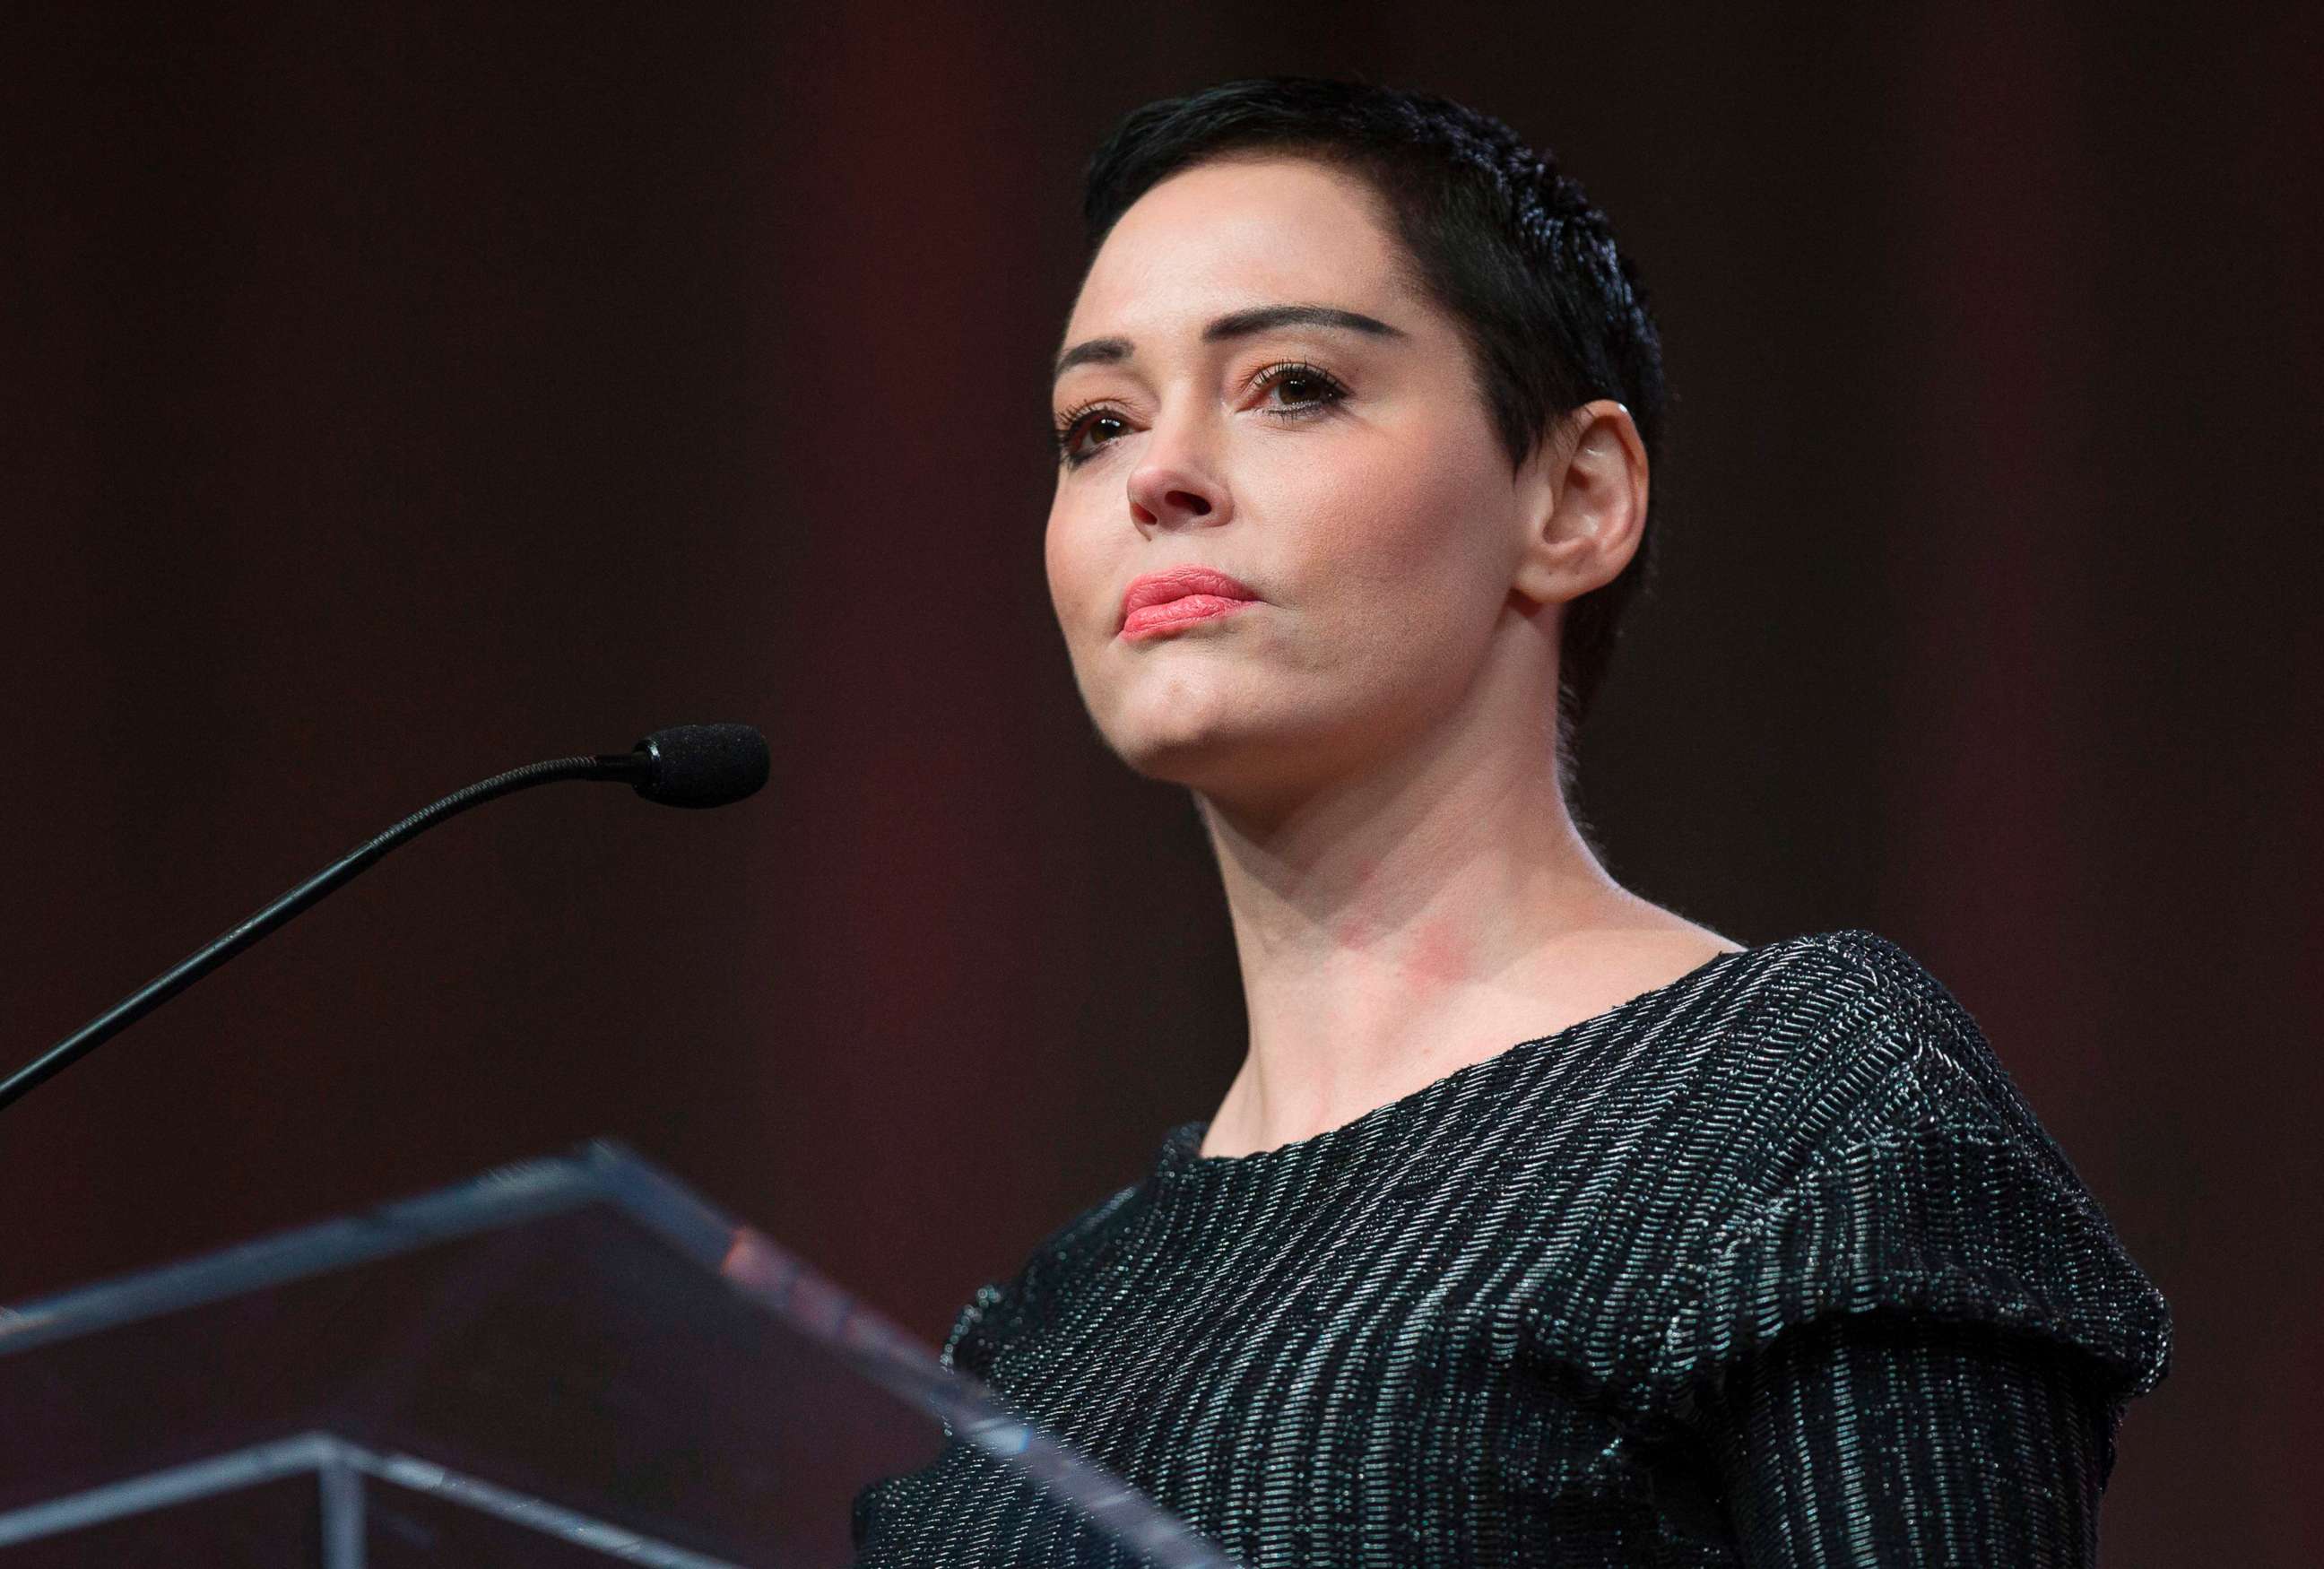 PHOTO: Rose McGowan gives opening remarks to the audience at the Women's March / Women's Convention in Detroit, Oct. 27, 2017. 
